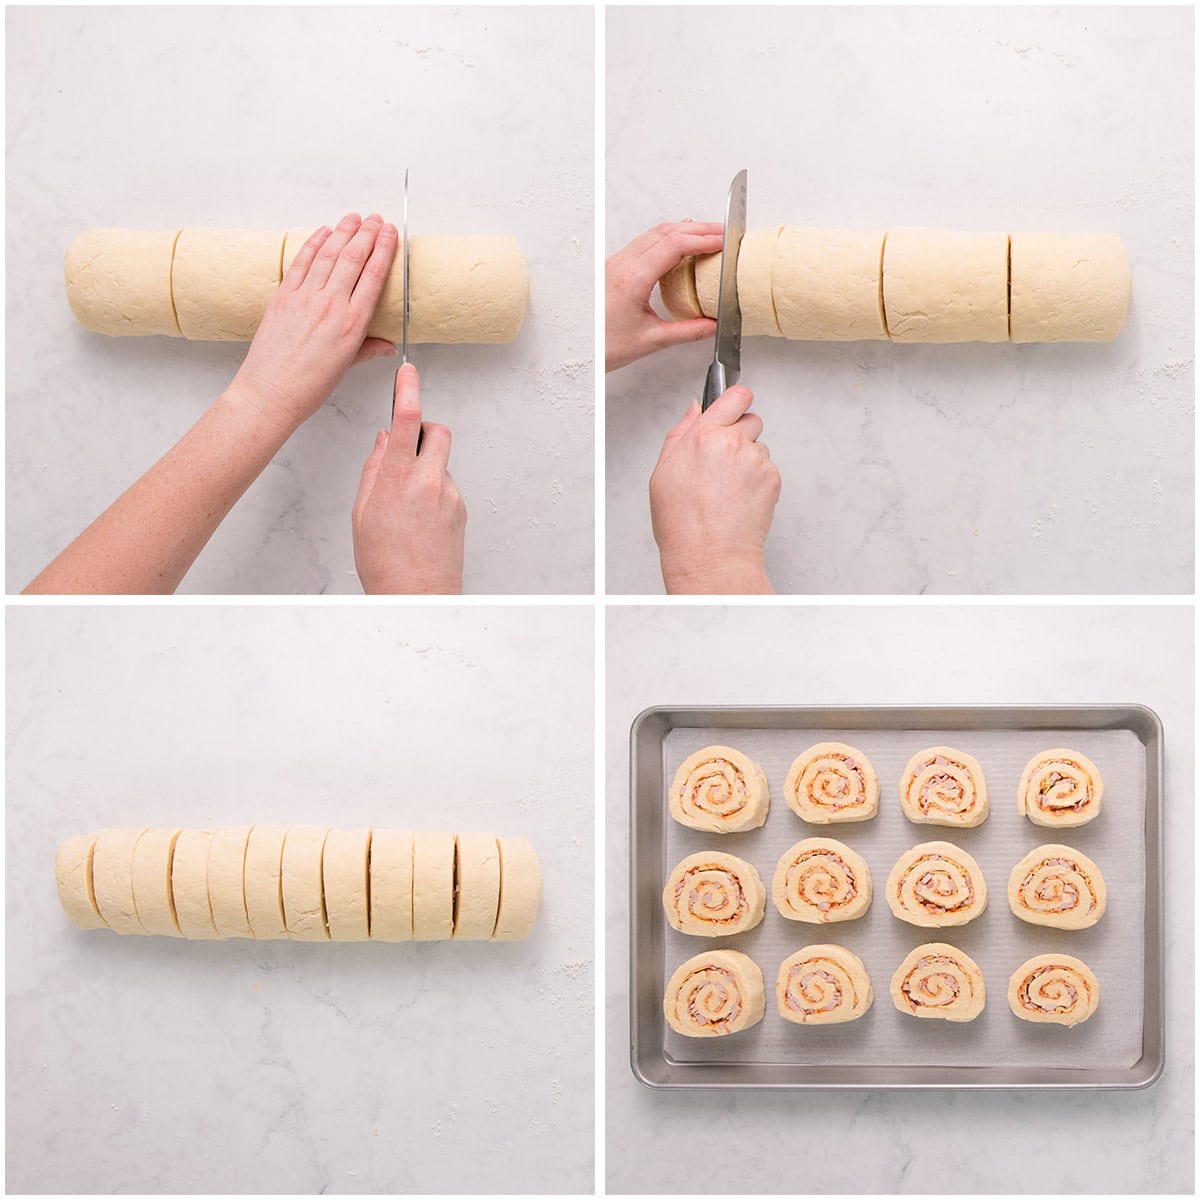 A four image collage showing the roll being cut into halves, then quarters, then twelfths, and then arranged on a baking tray.